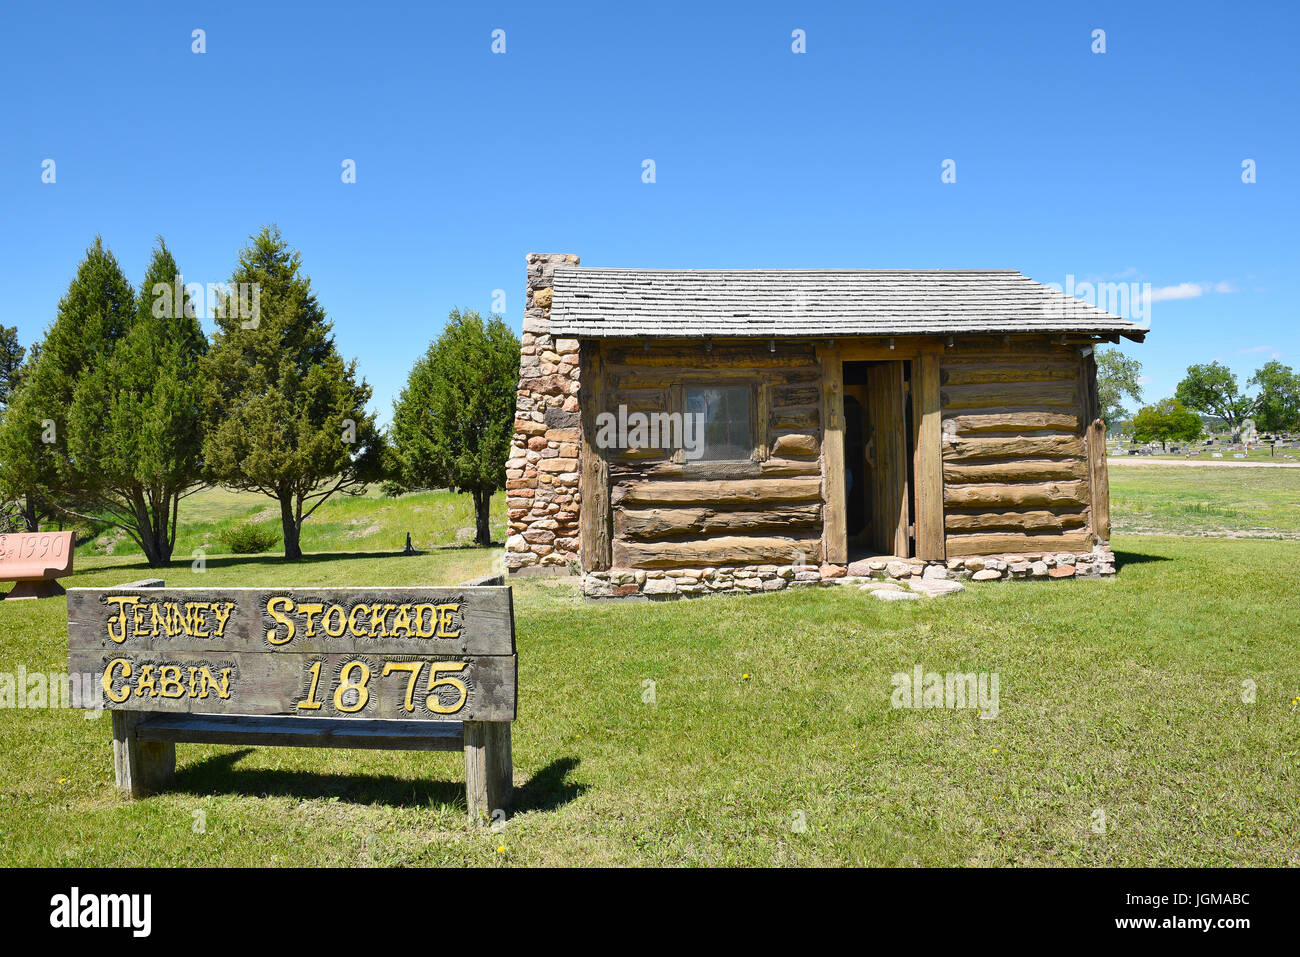 NEWCASTLE, WYOMING - 23. Juni 2017: Anna Miller Museum Jenney Palisade. Das Hauptmuseum befindet sich in Wyoming Army National Guard Kavallerie stabil, Stockfoto